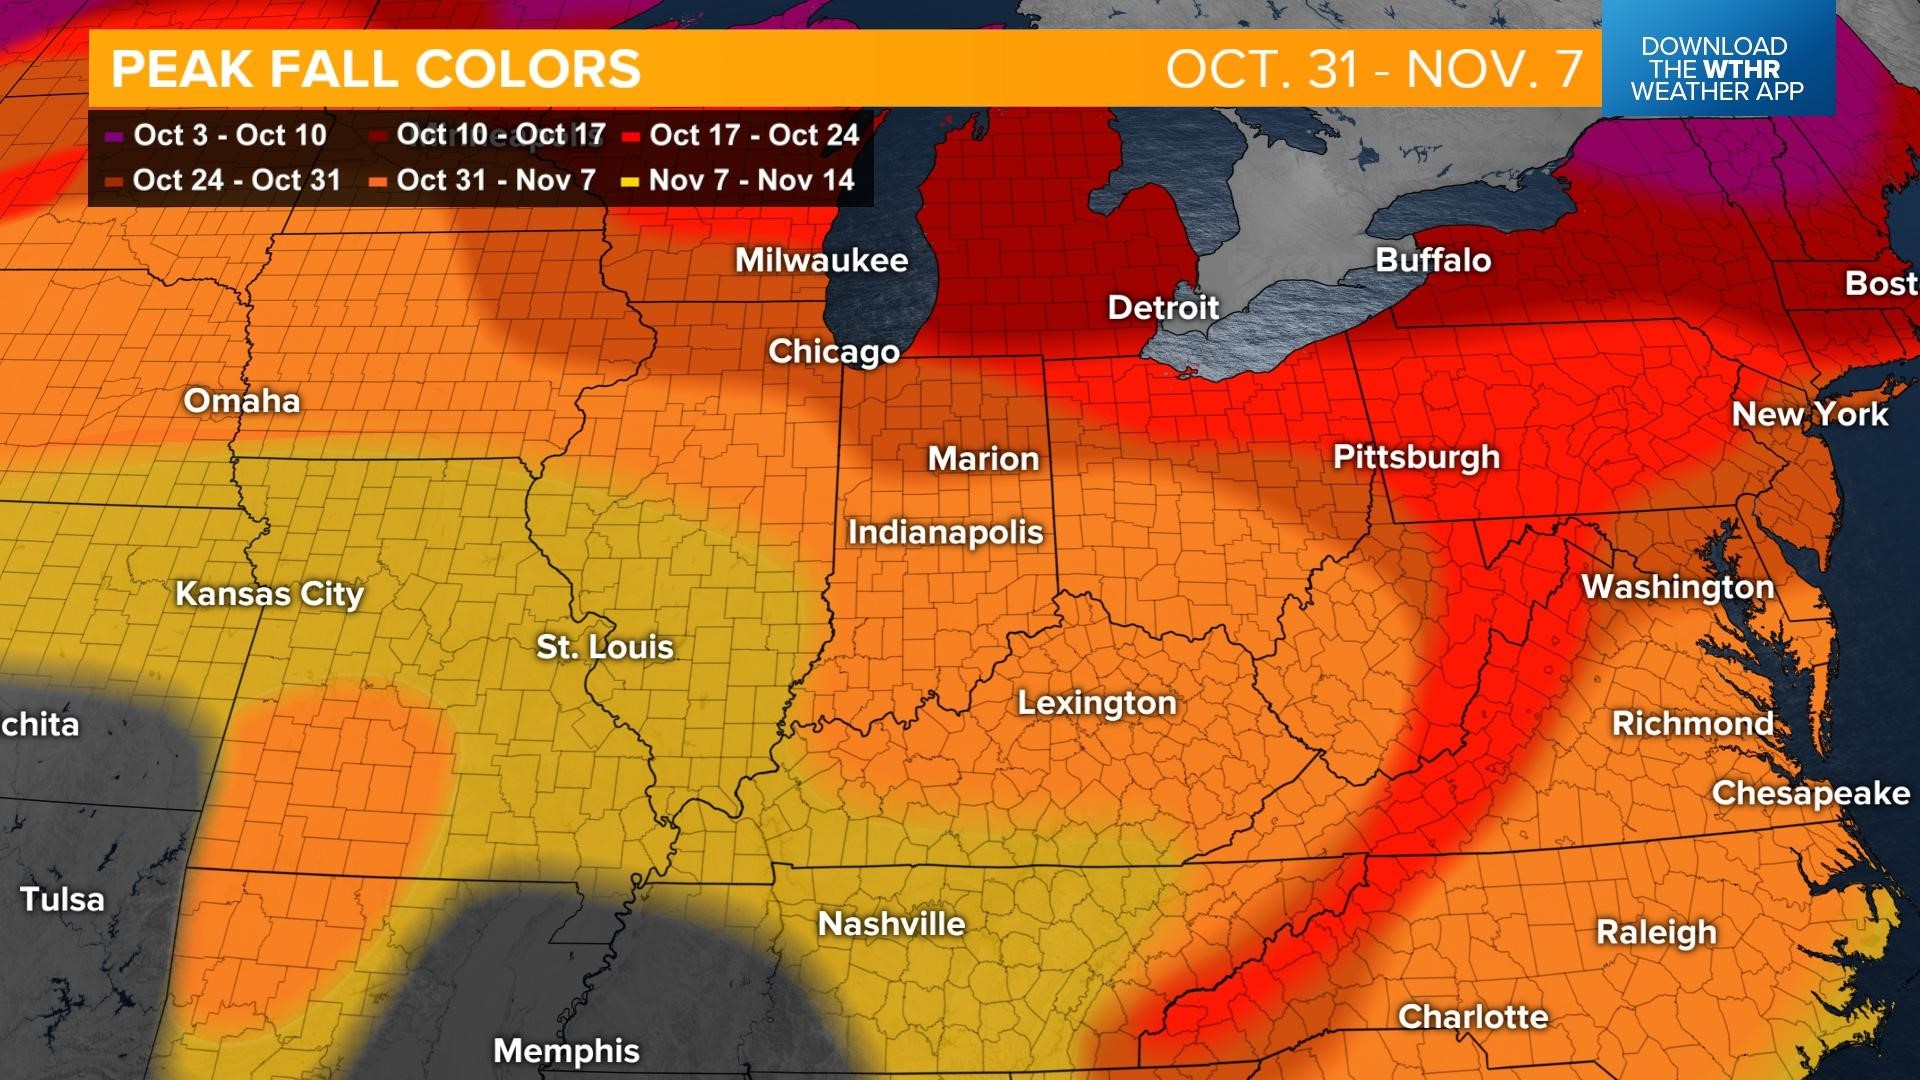 Cooler temperatures are helping leaves turn from north to south in Indiana.